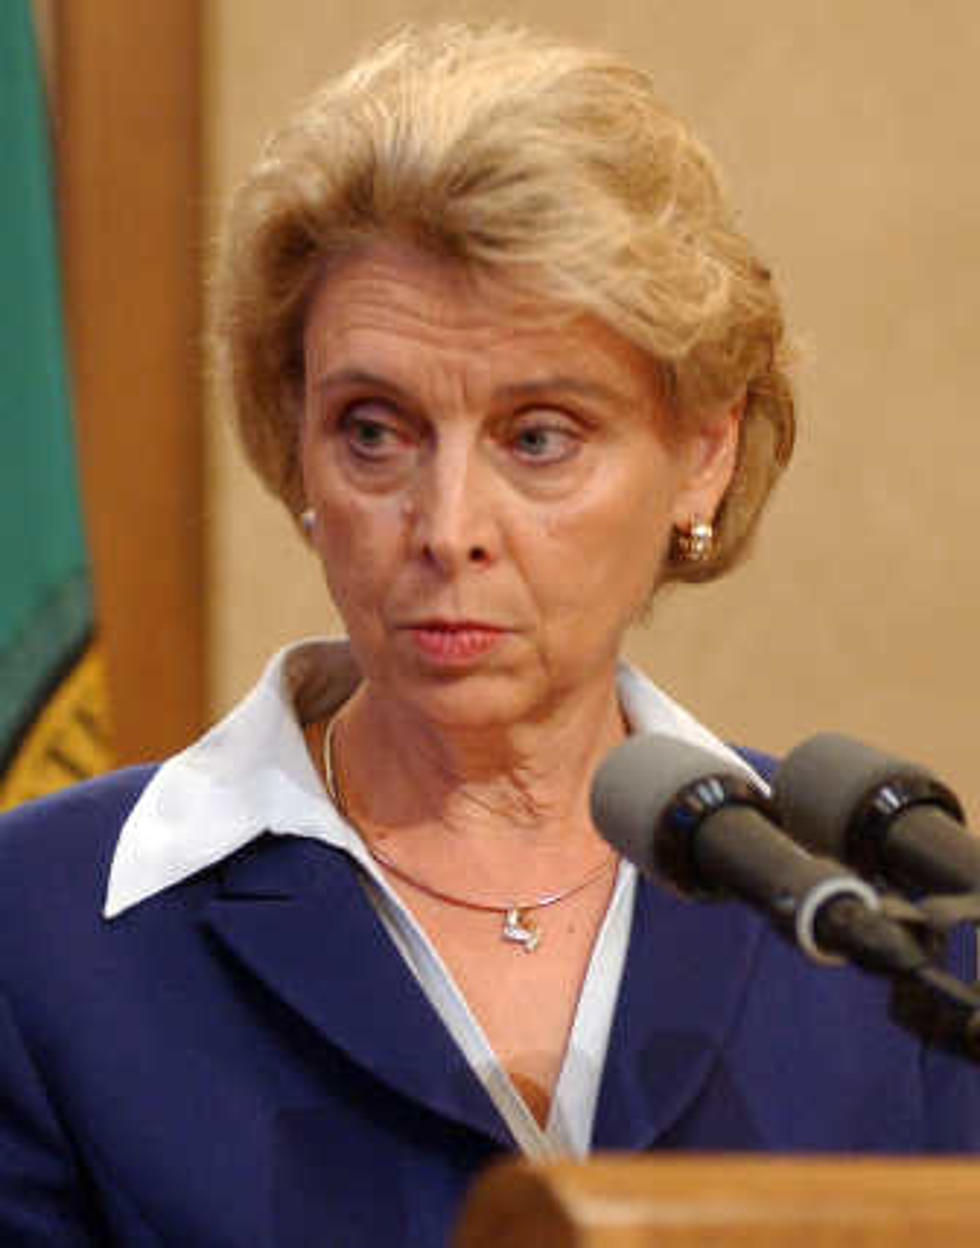 Gov. Gregoire: “It’s Time For Me To Go On And Do Something Else.”